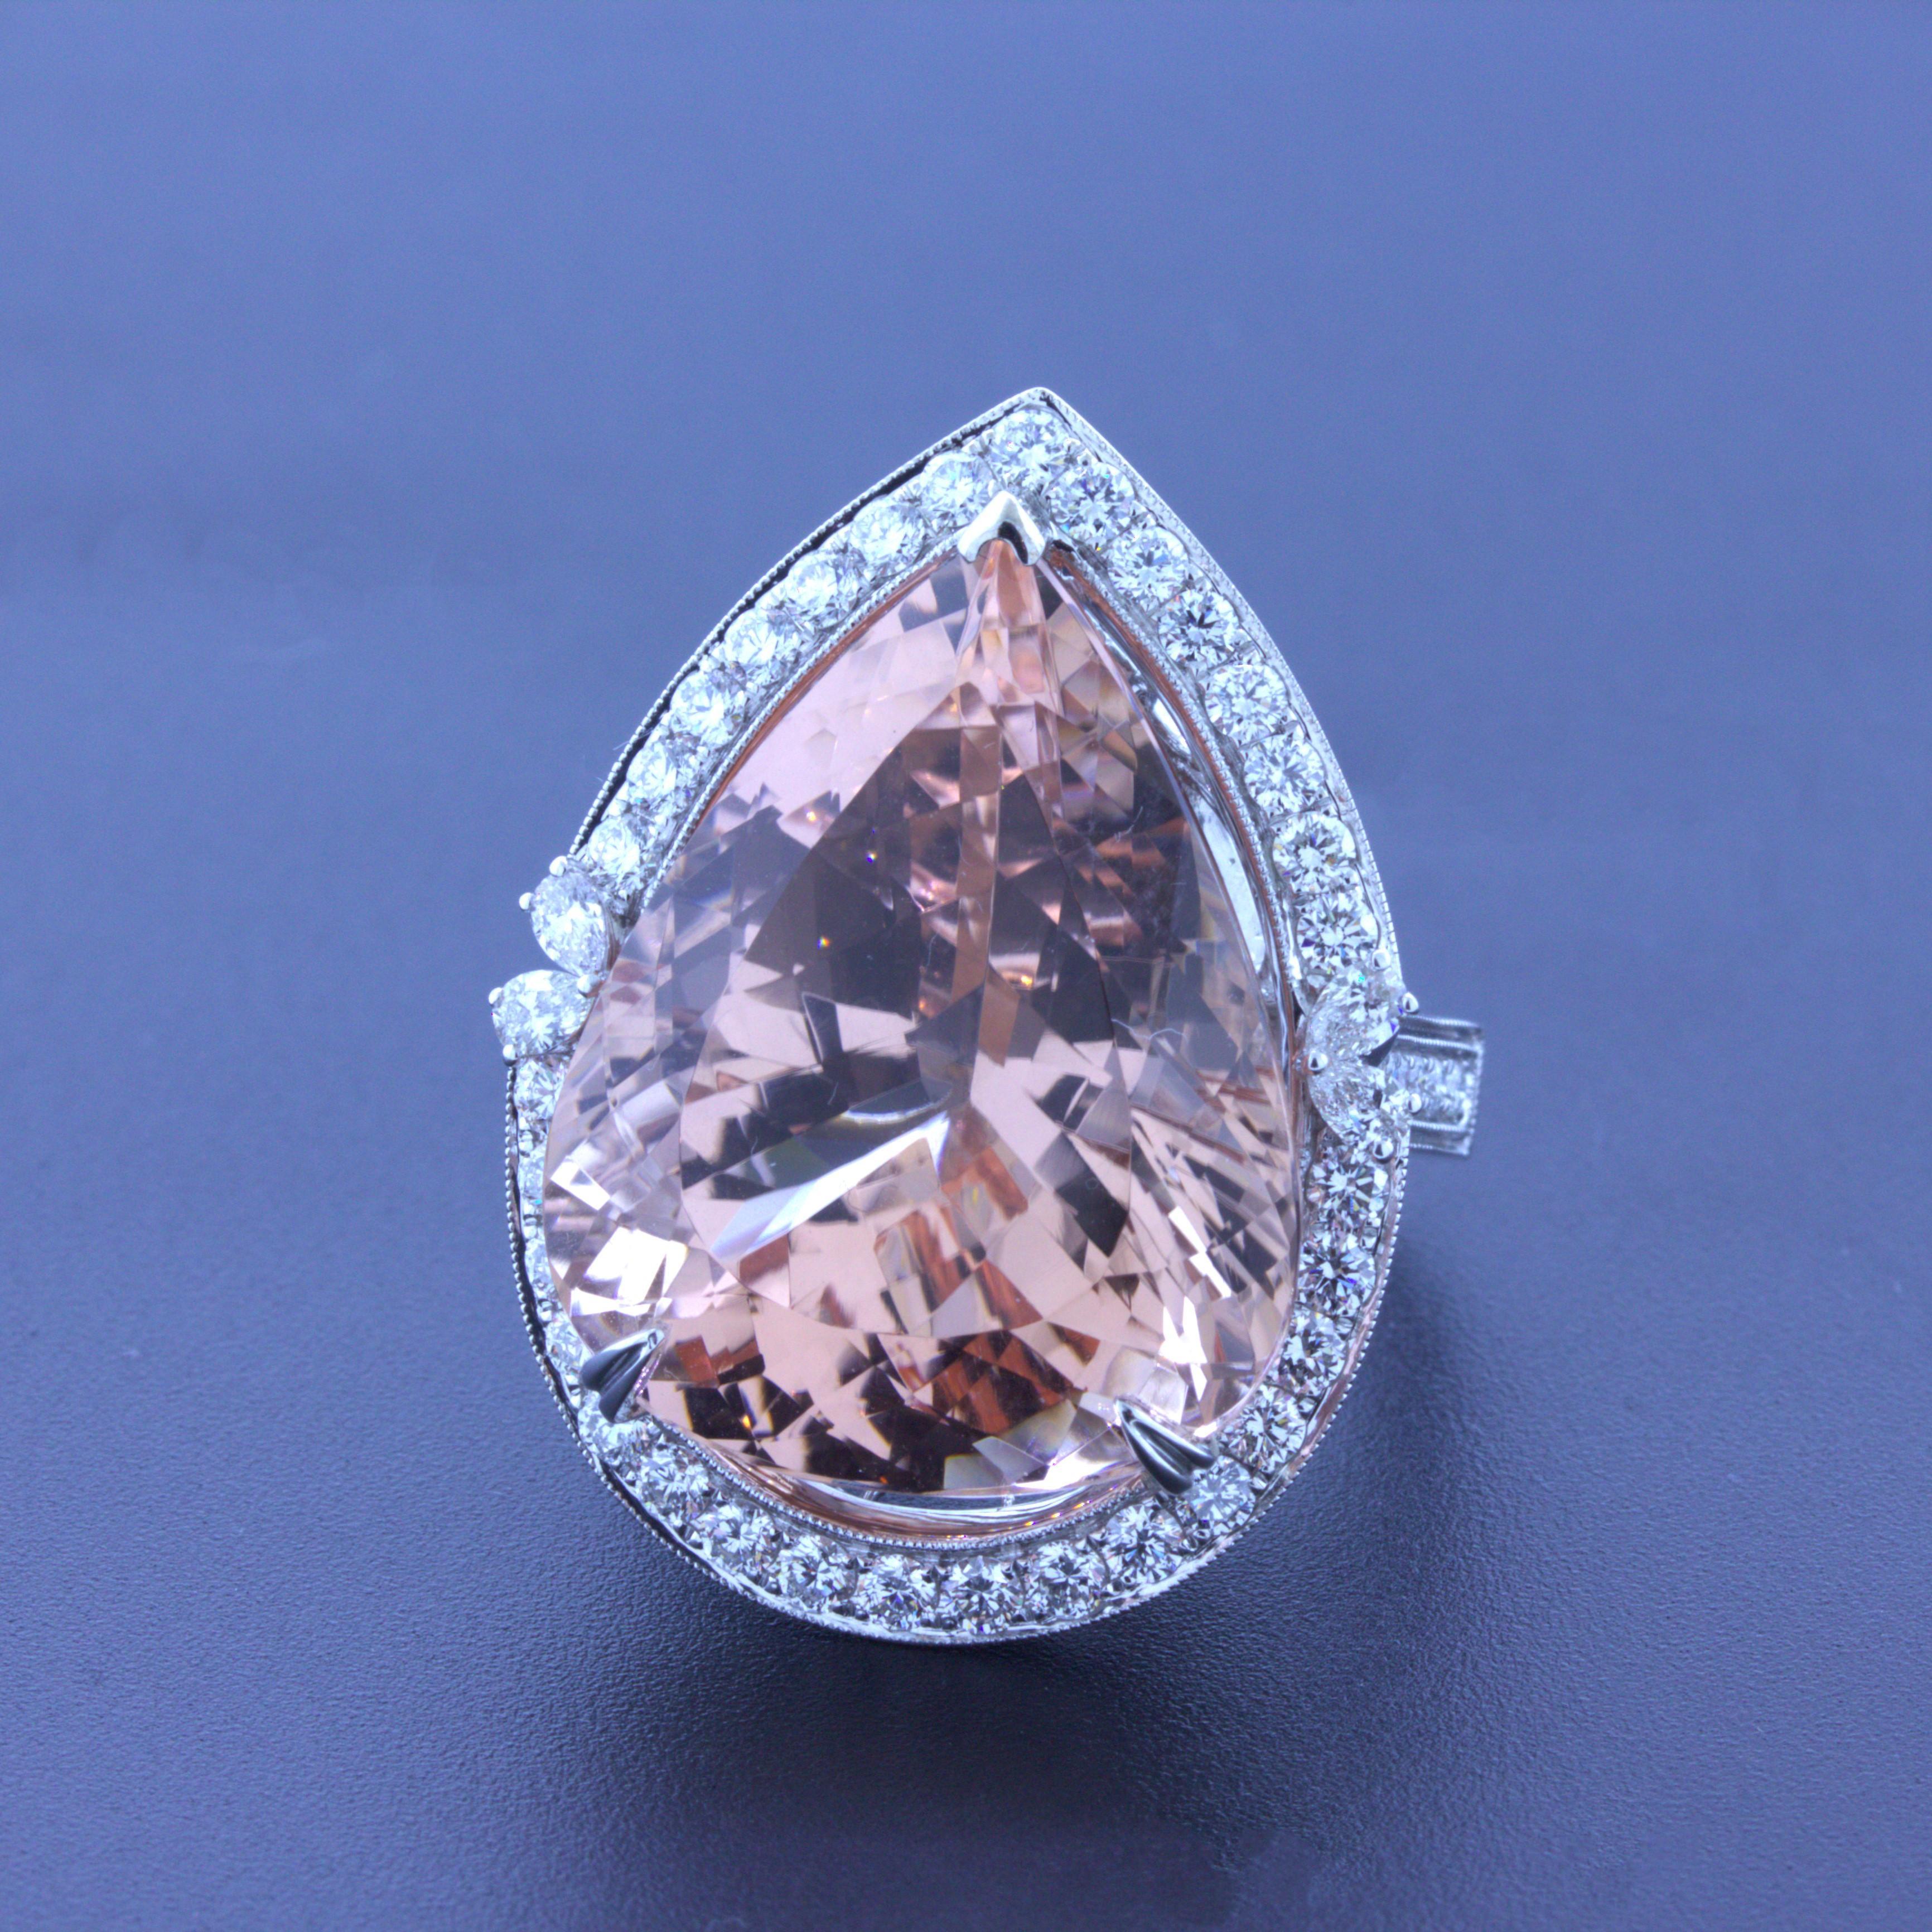 A chic and elegant cocktail ring featuring a large 30.27 carat morganite! It has a lovely pear-shape along with a rich peach color with excellent light return due to the stones' precise cutting and polishing. It is complemented by 1.57 carats of